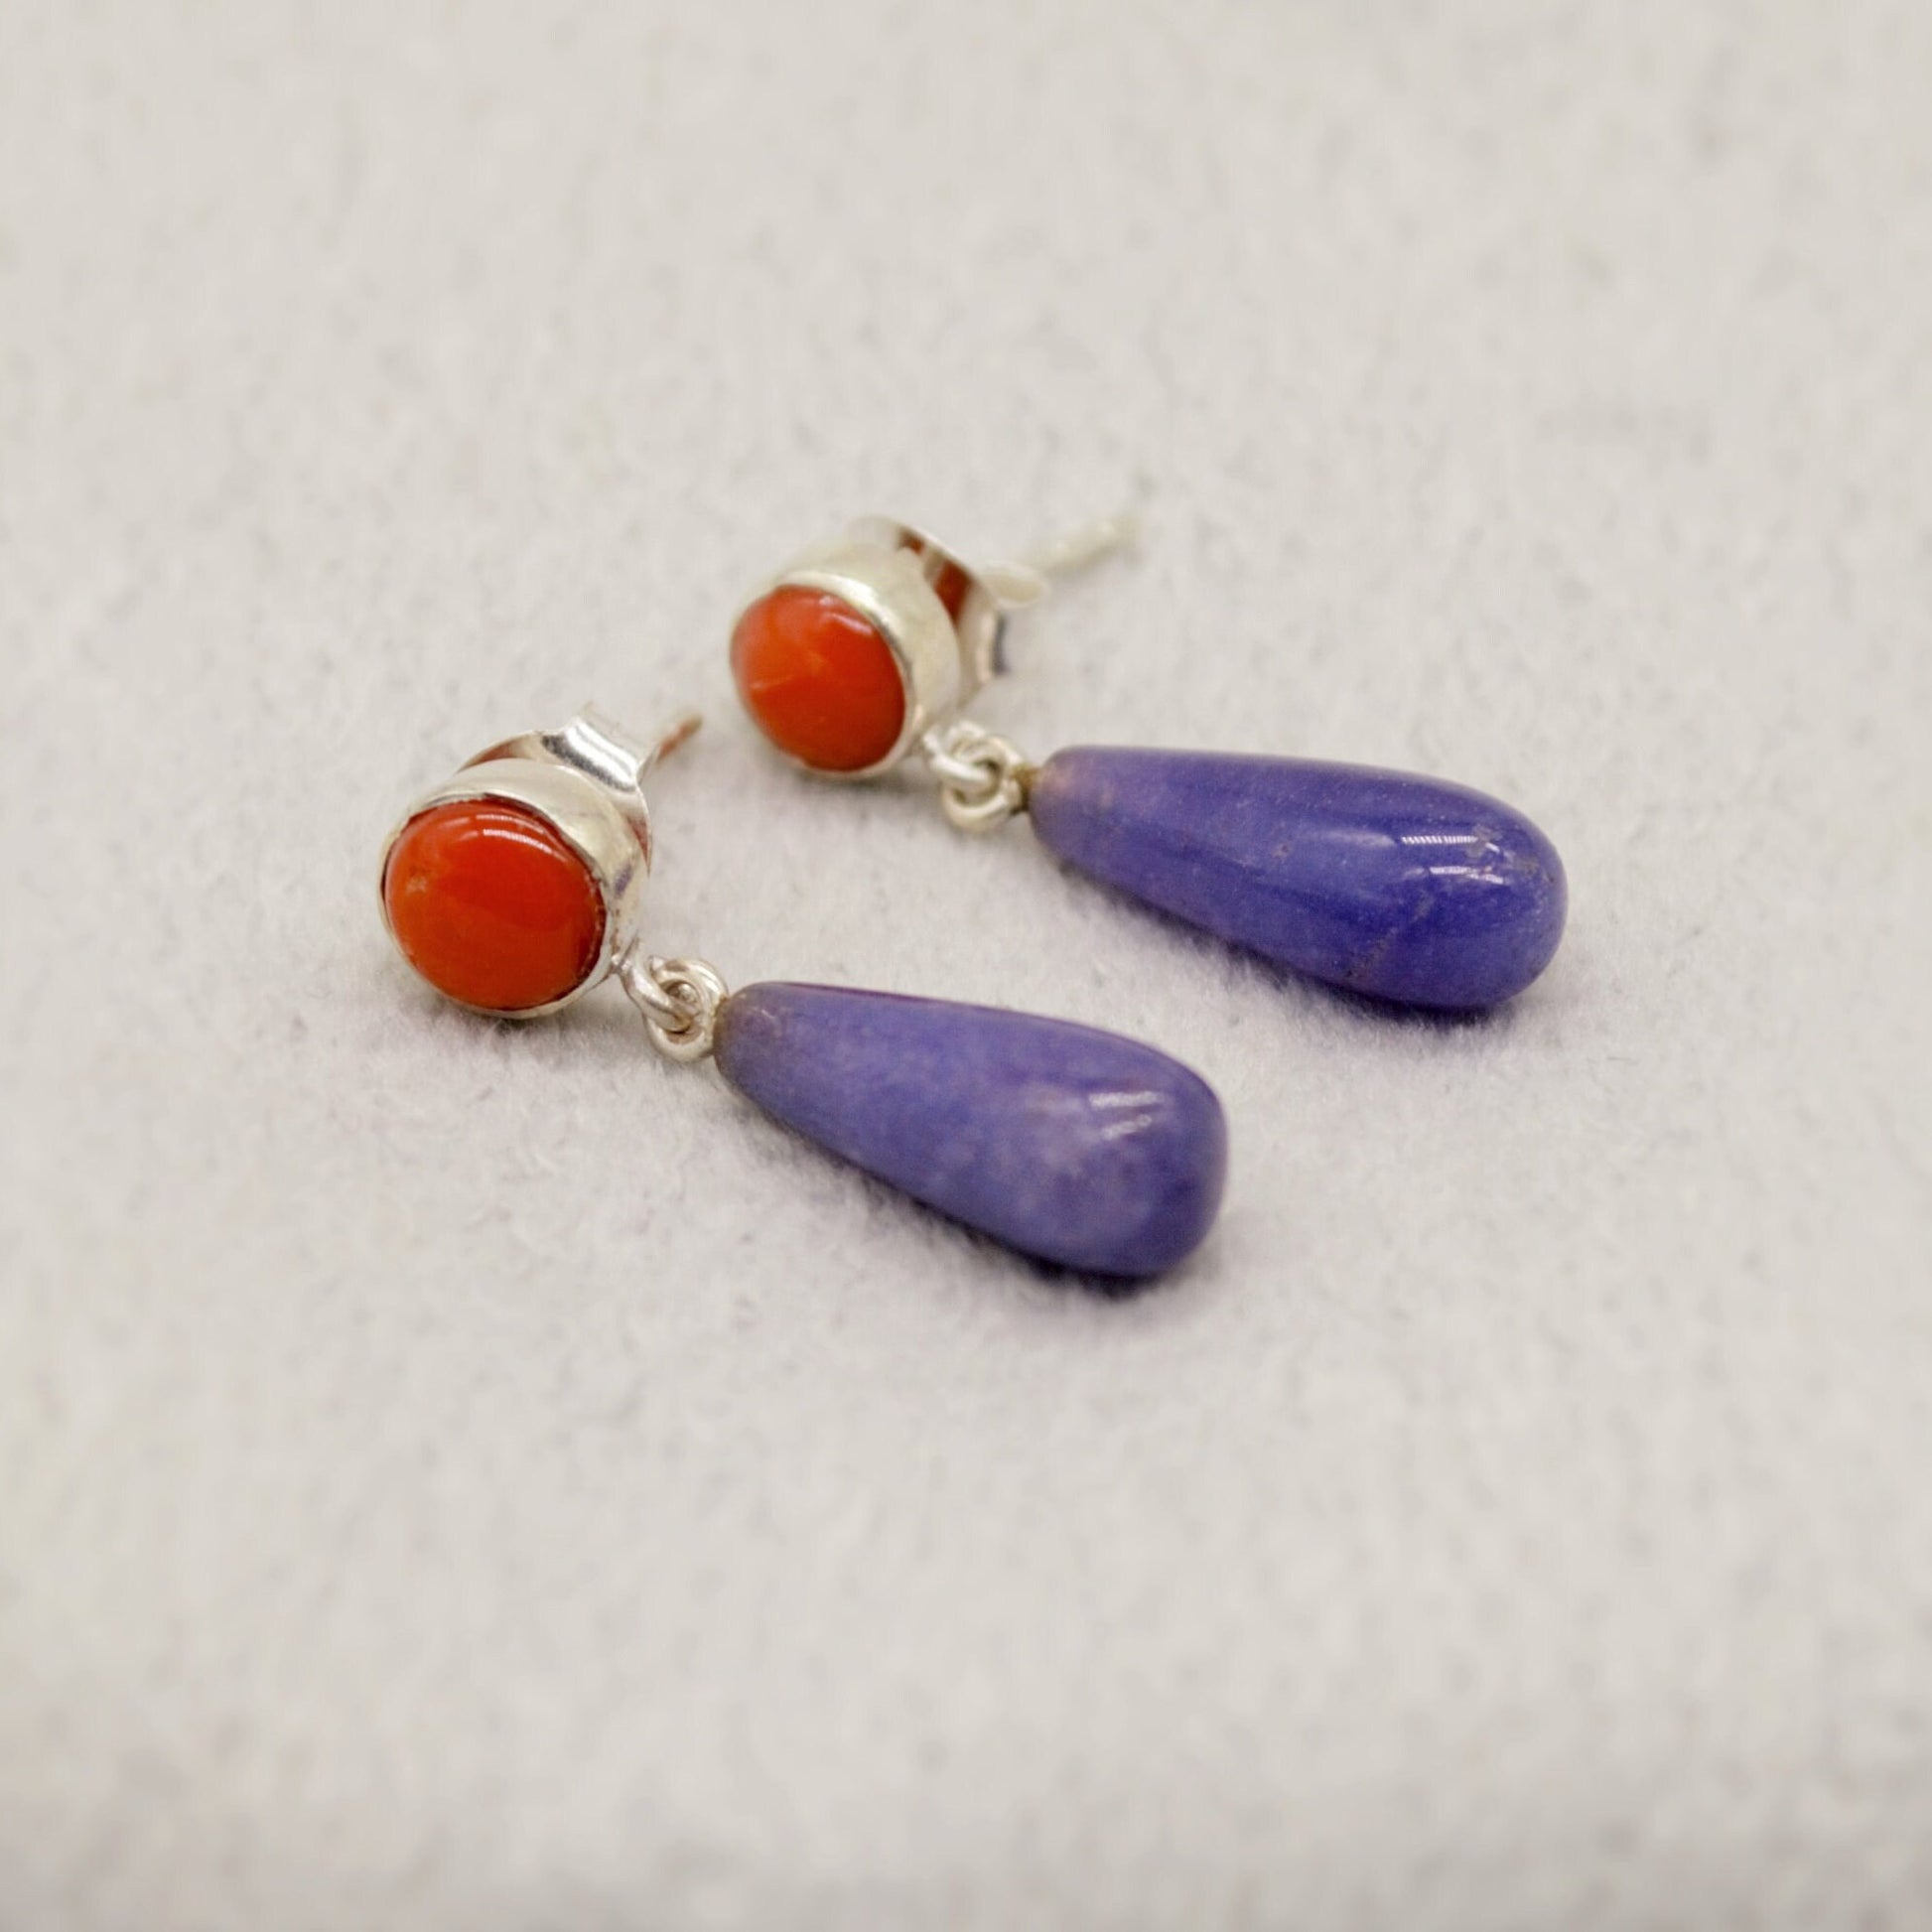 Purple Jade, Red Coral Drop Earrings, Sterling Silver, Red Coral Jewelry, Handmade Gemstone Earrings, Unique Cute Gifts For Her